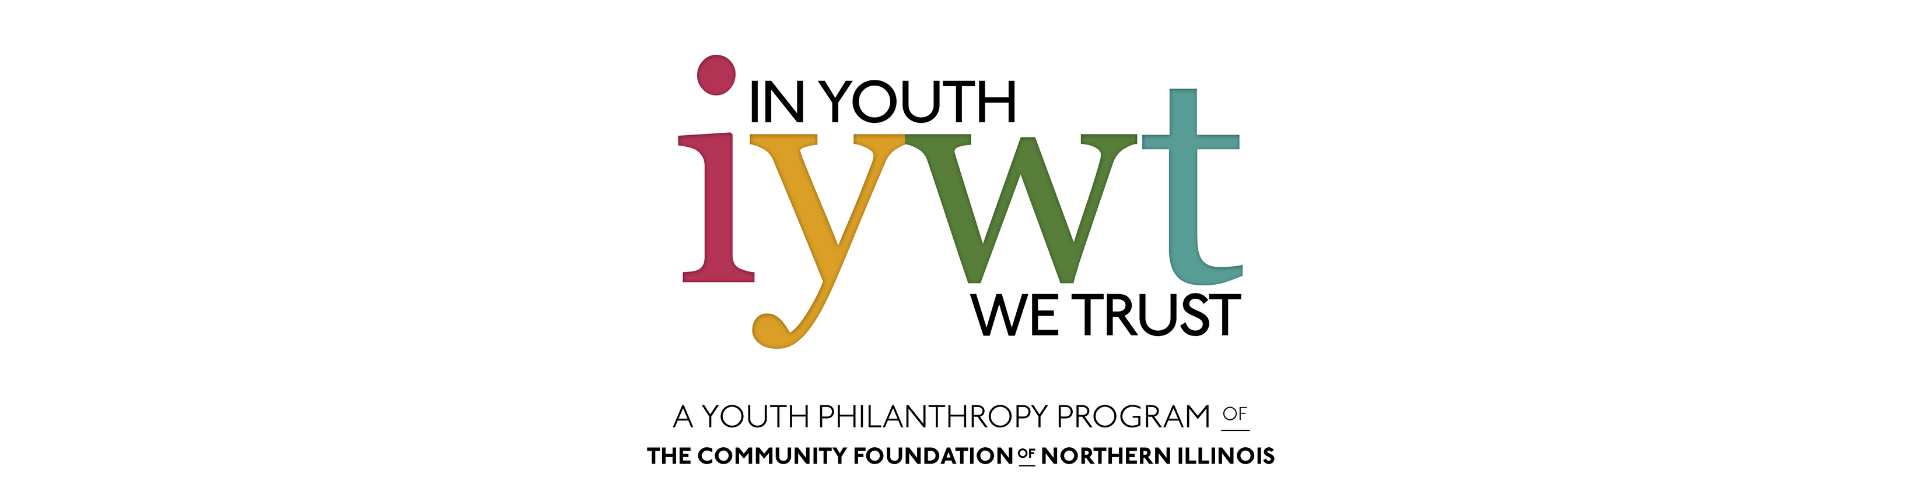 In Youth We Trust logo. In Youth We Trust a youth philanthropy program of the Community Foundation of Northern Illinois